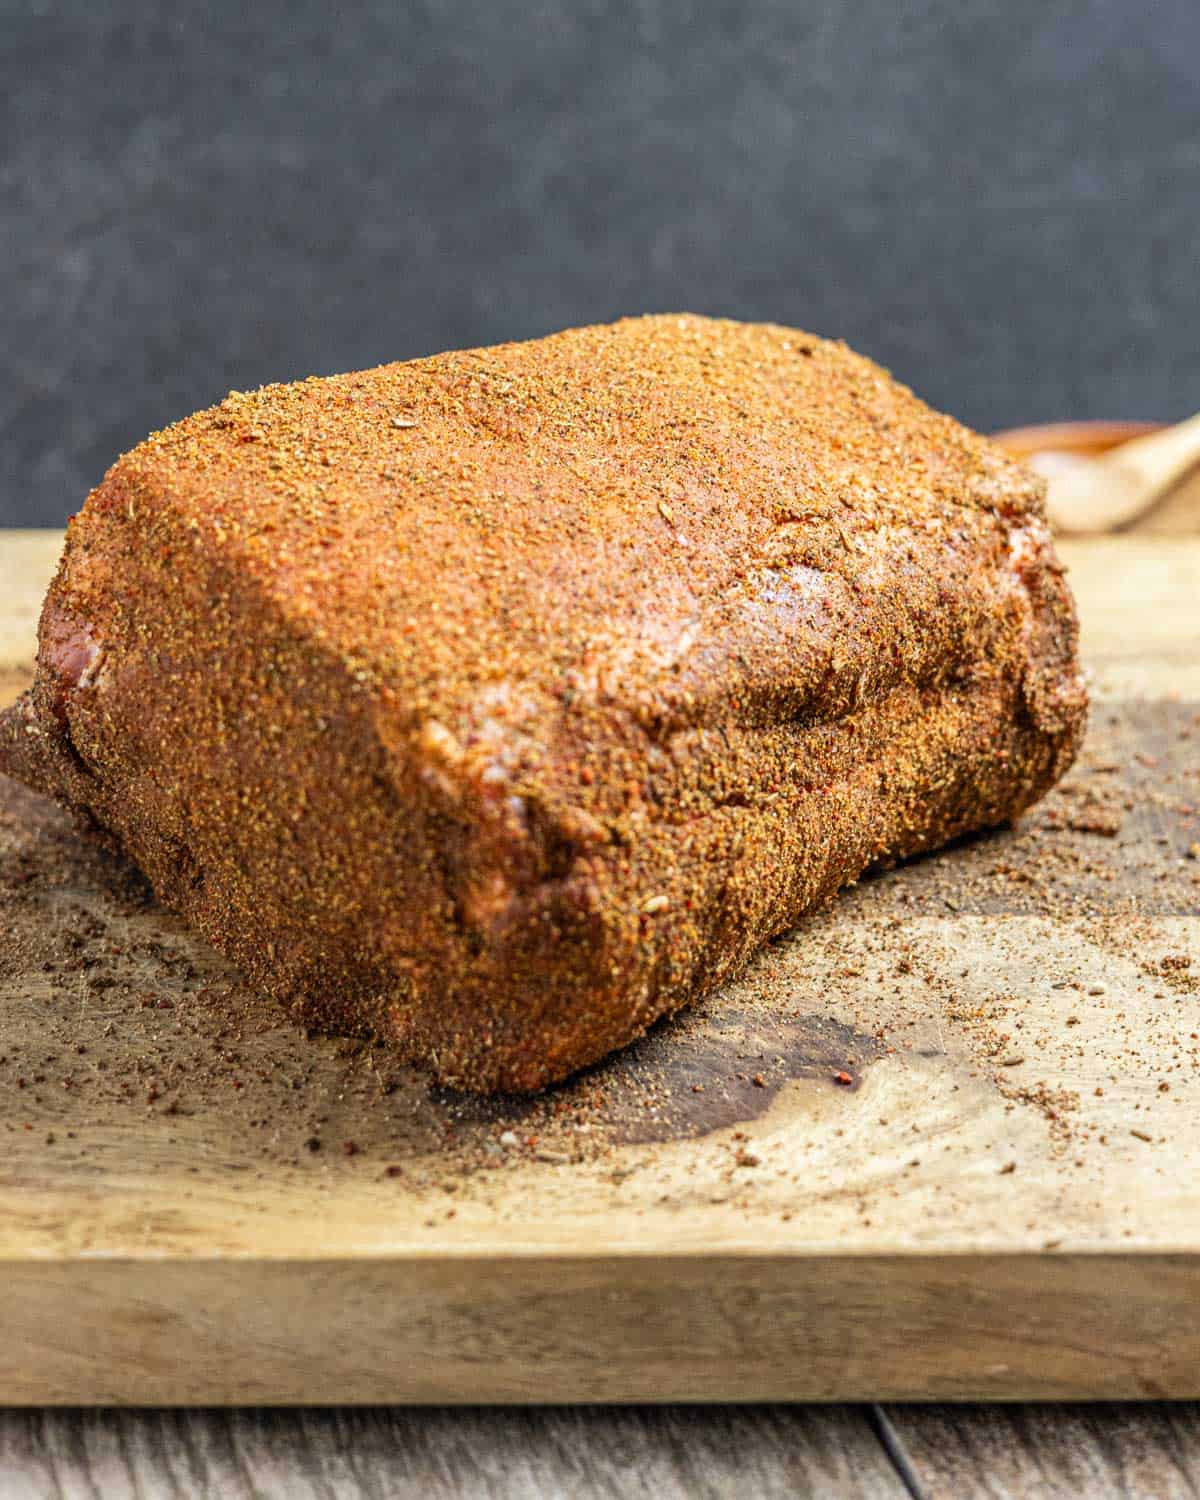 Raw pork shoulder on a wood board covered in dry spice rub.